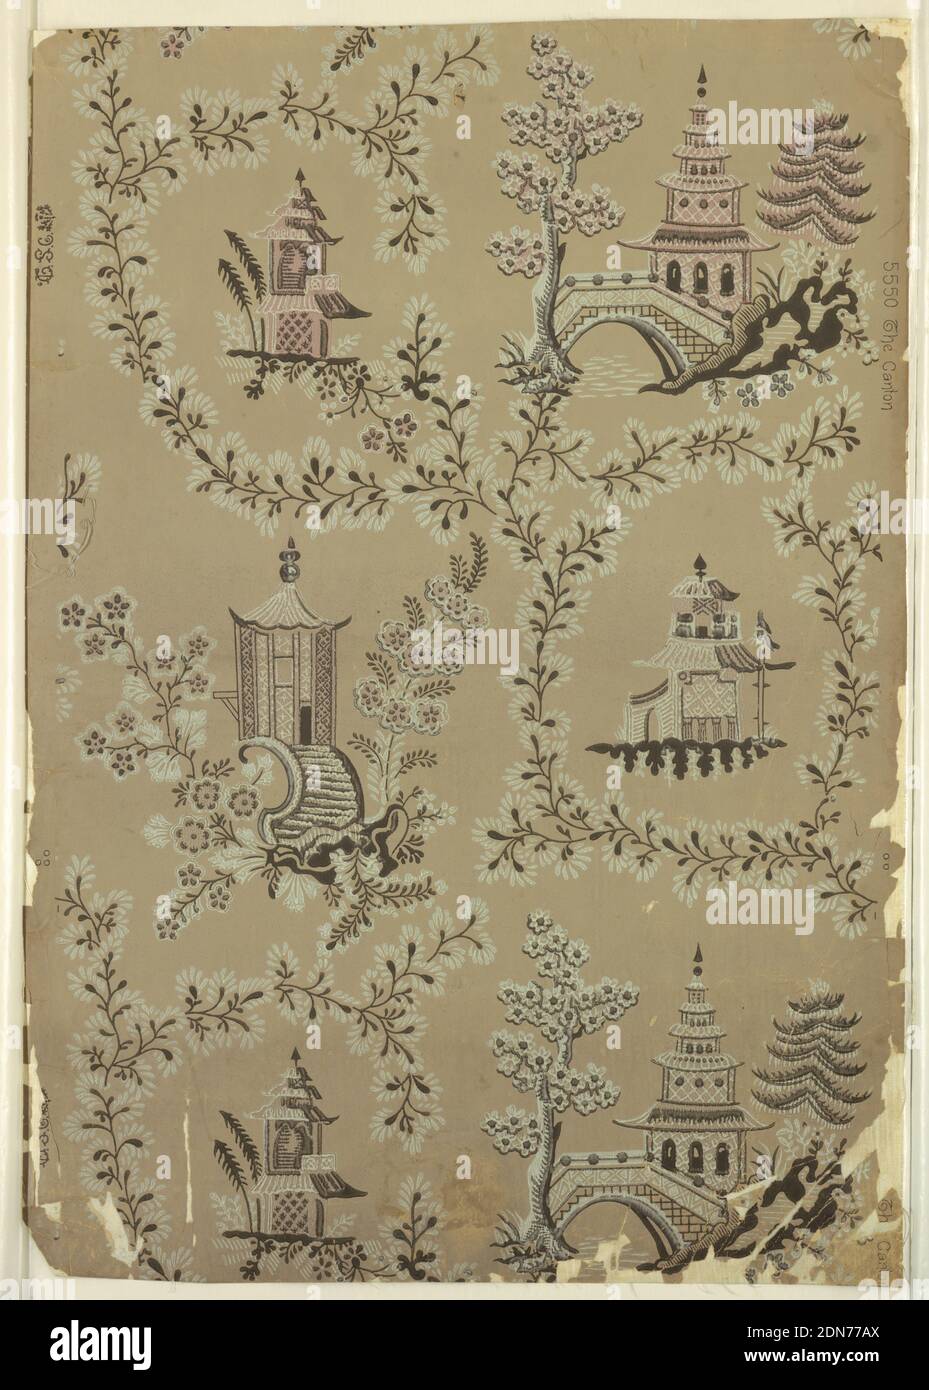 The Canton, Thomas Strahan & Co., Manufactory, Machine-printed paper, Vertical rectangle, a full width, giving nearly two repeats. Framework of simple floral forms enclosing areas of varying size and shape, with Chinoiserie pagoda and three different summer houses., Chelsea, Massachusetts, USA, ca. 1910, Wallcoverings, Sidewall, Sidewall Stock Photo